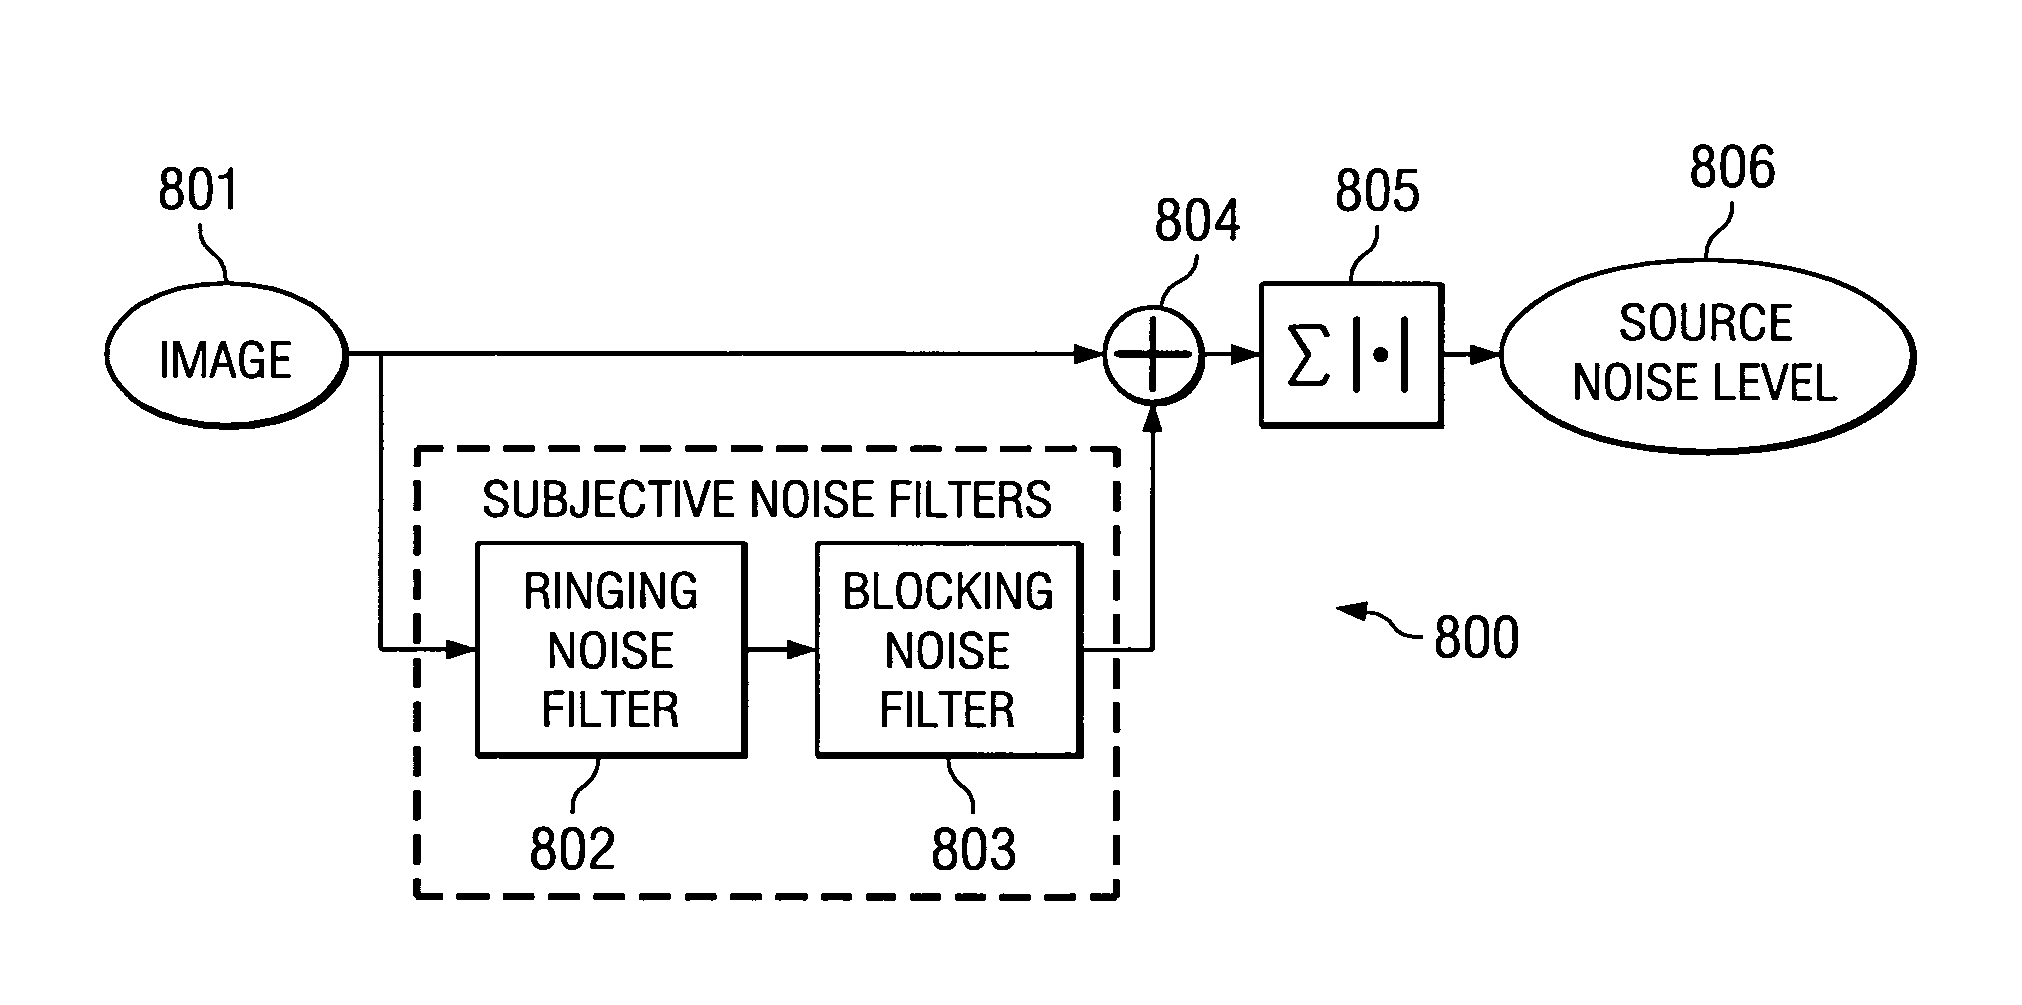 Dynamic pre-filter control with subjective noise detector for video compression